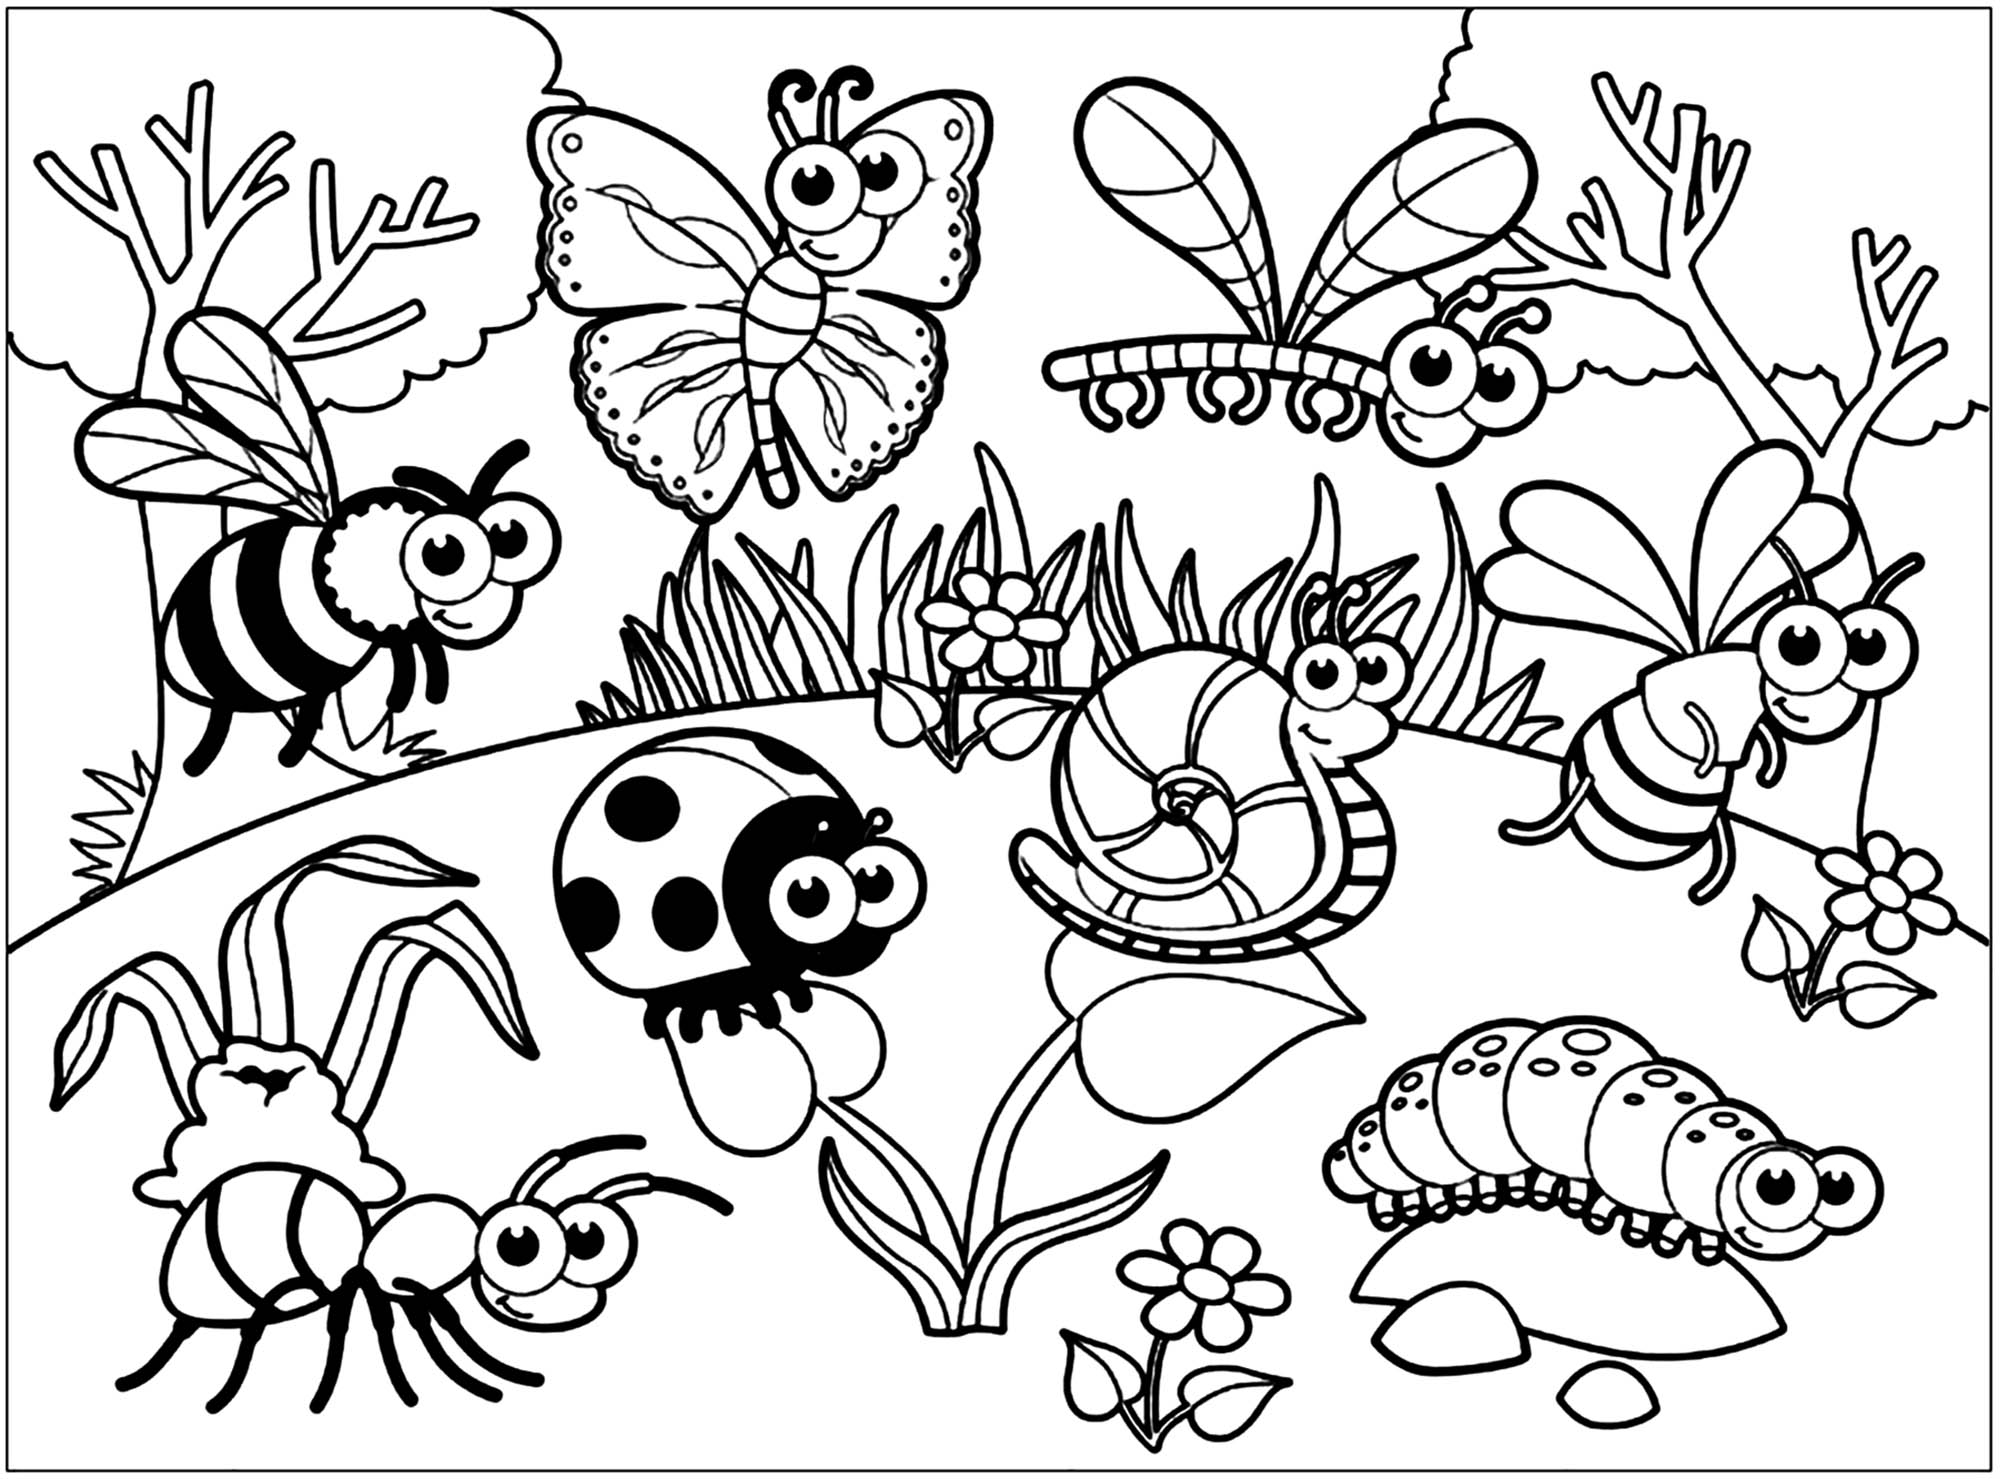 Diverses insects drawn in a cartoon and childish style